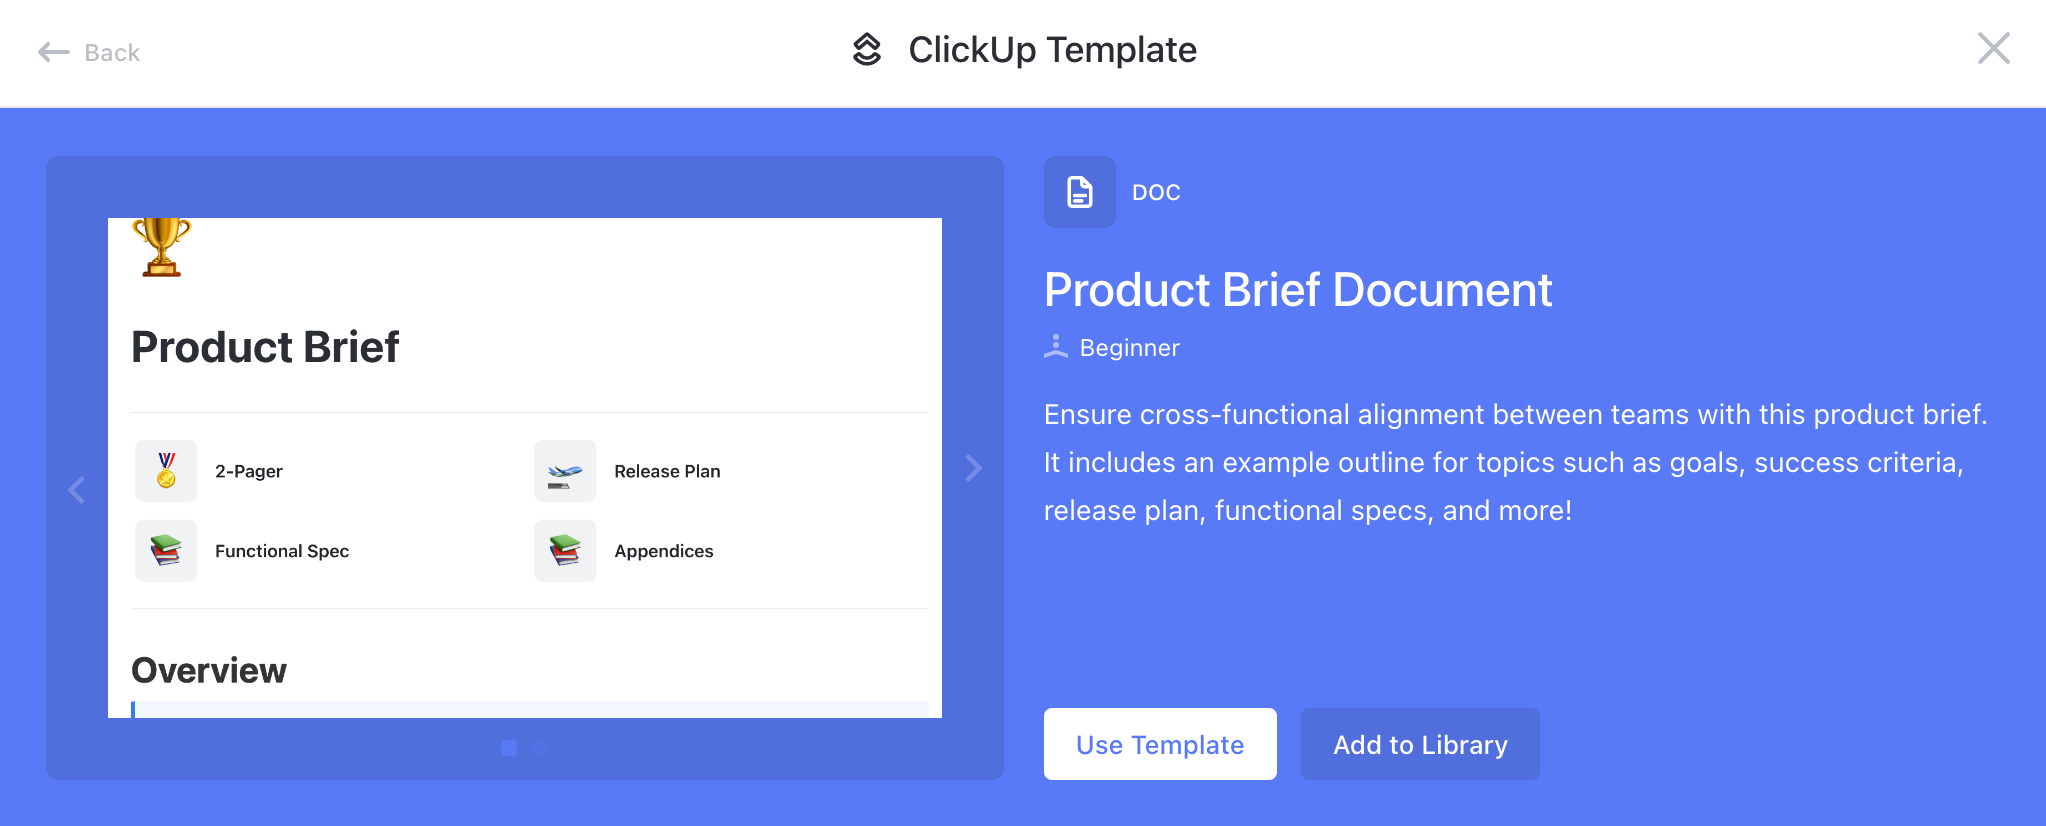 Screenshot of the product brief doc template